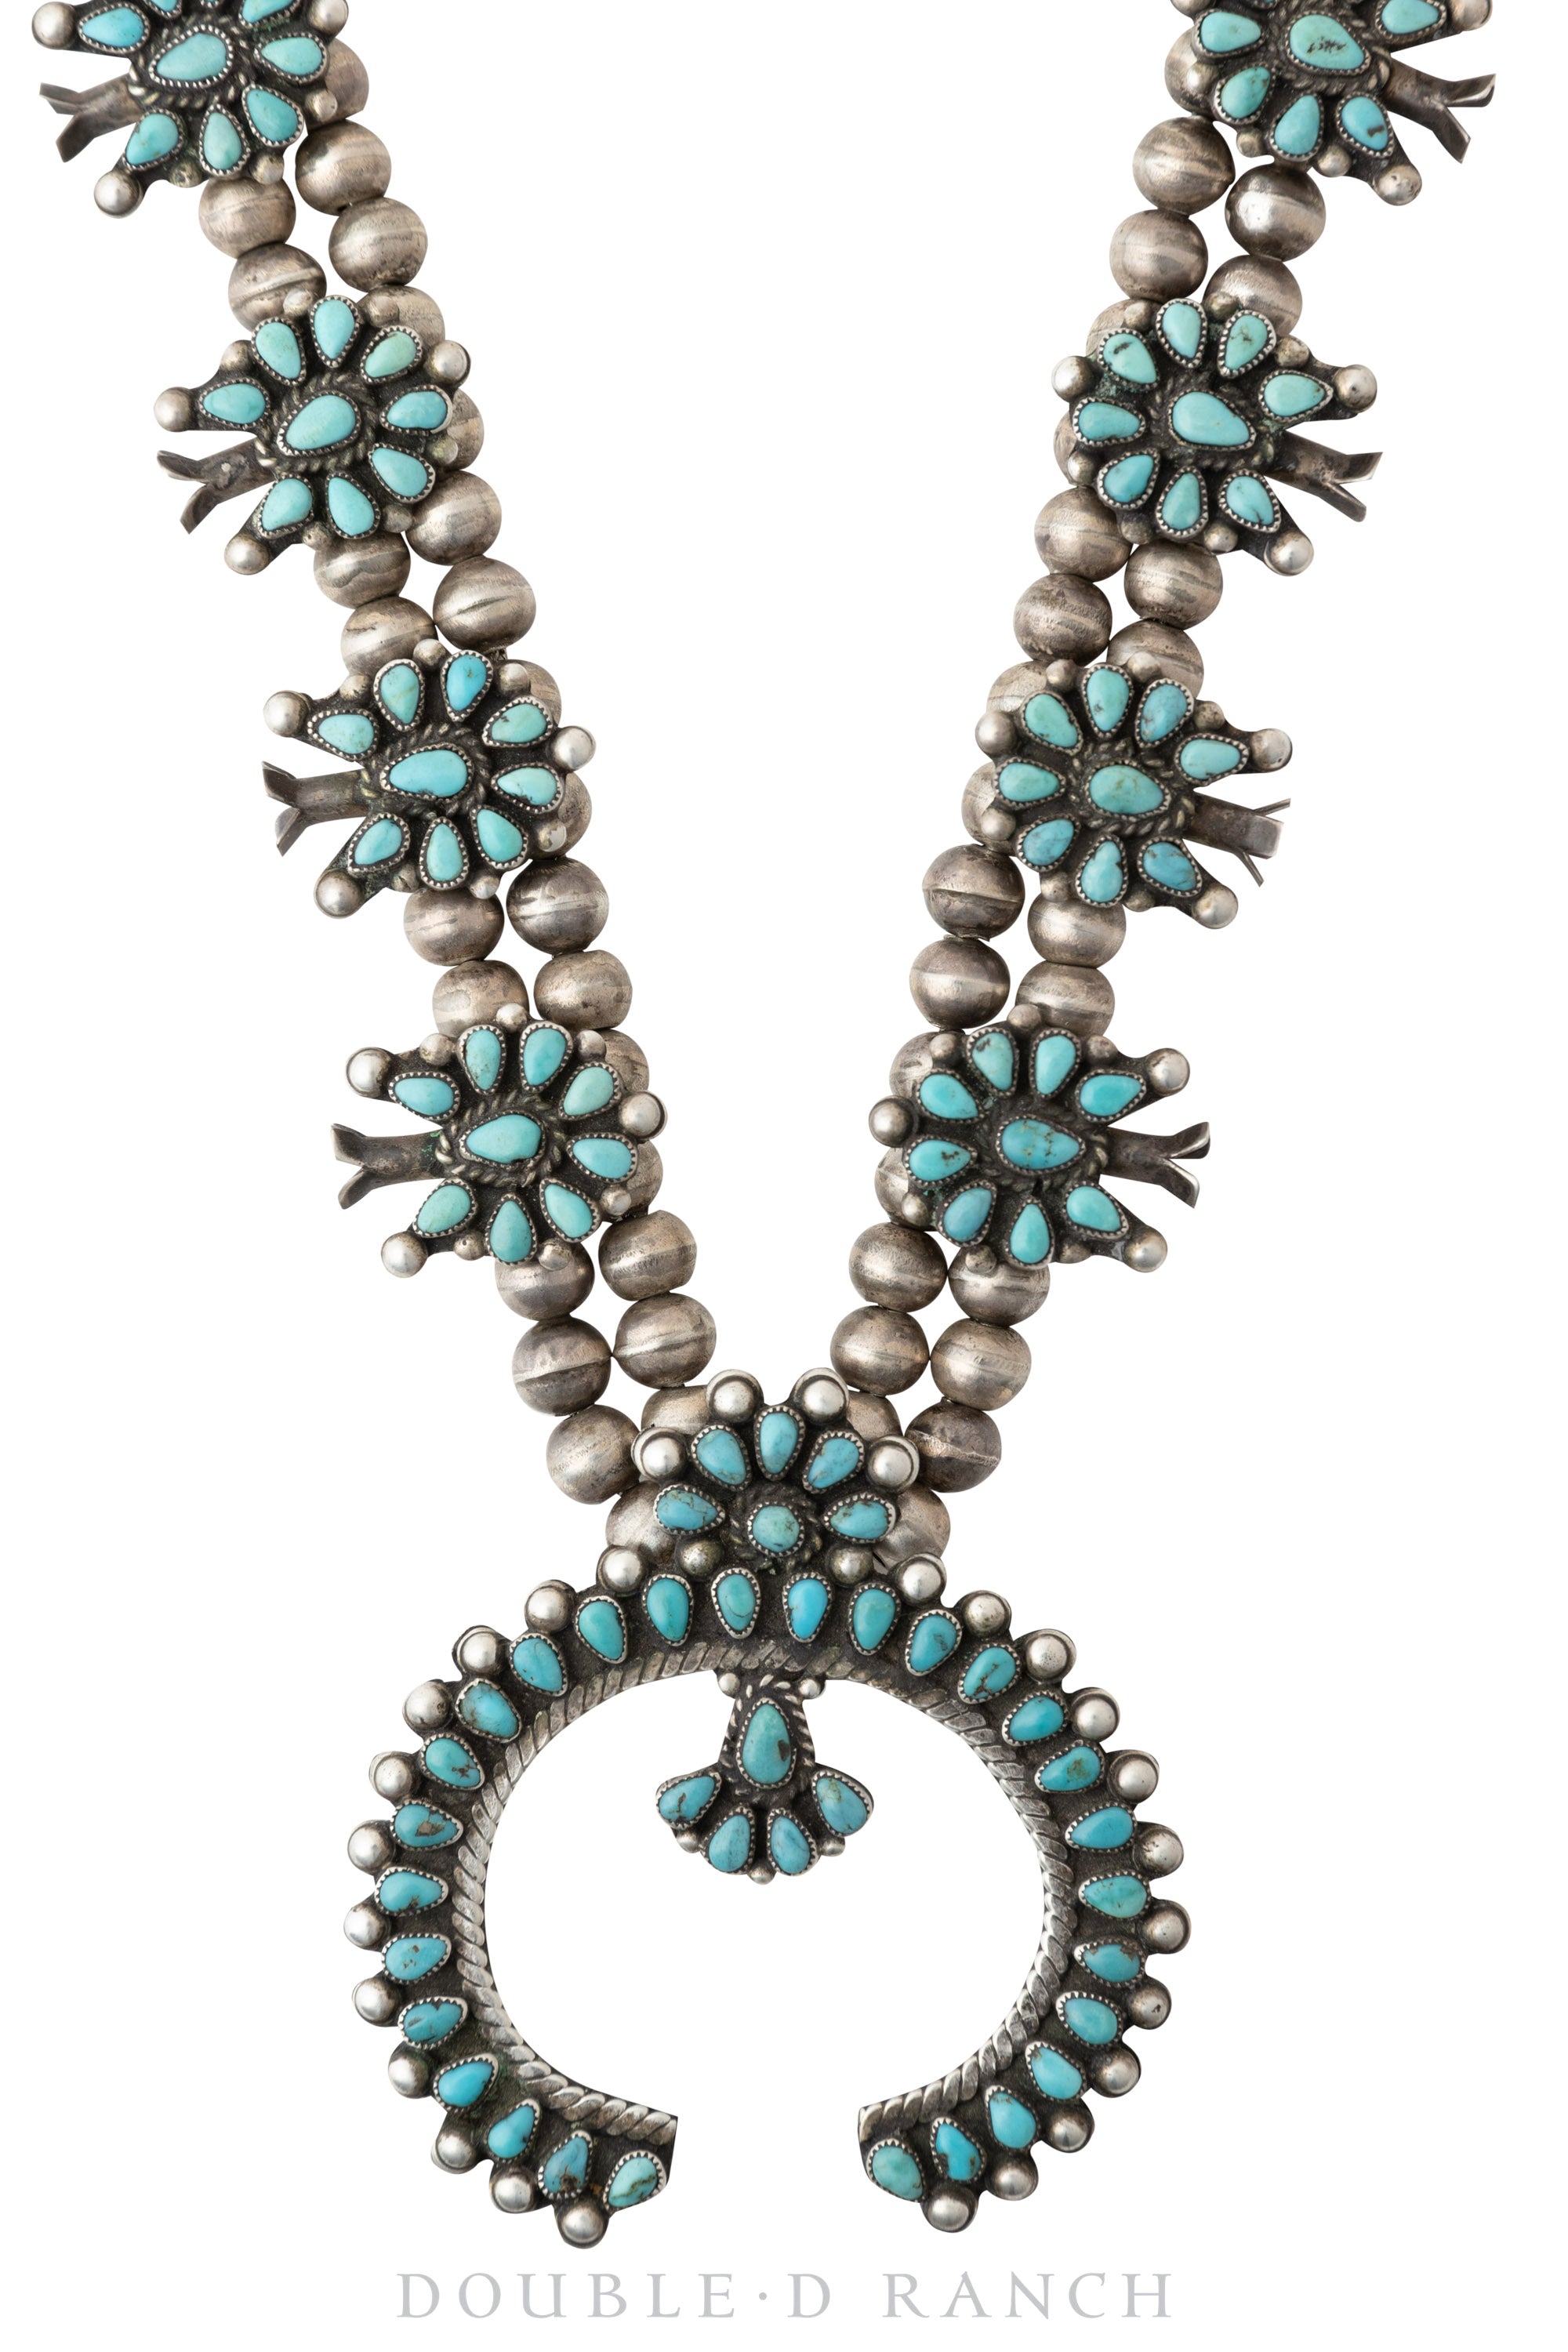 The Lone Pine Turquoise Squash Blossom Necklace Set – Calli Co. Silver